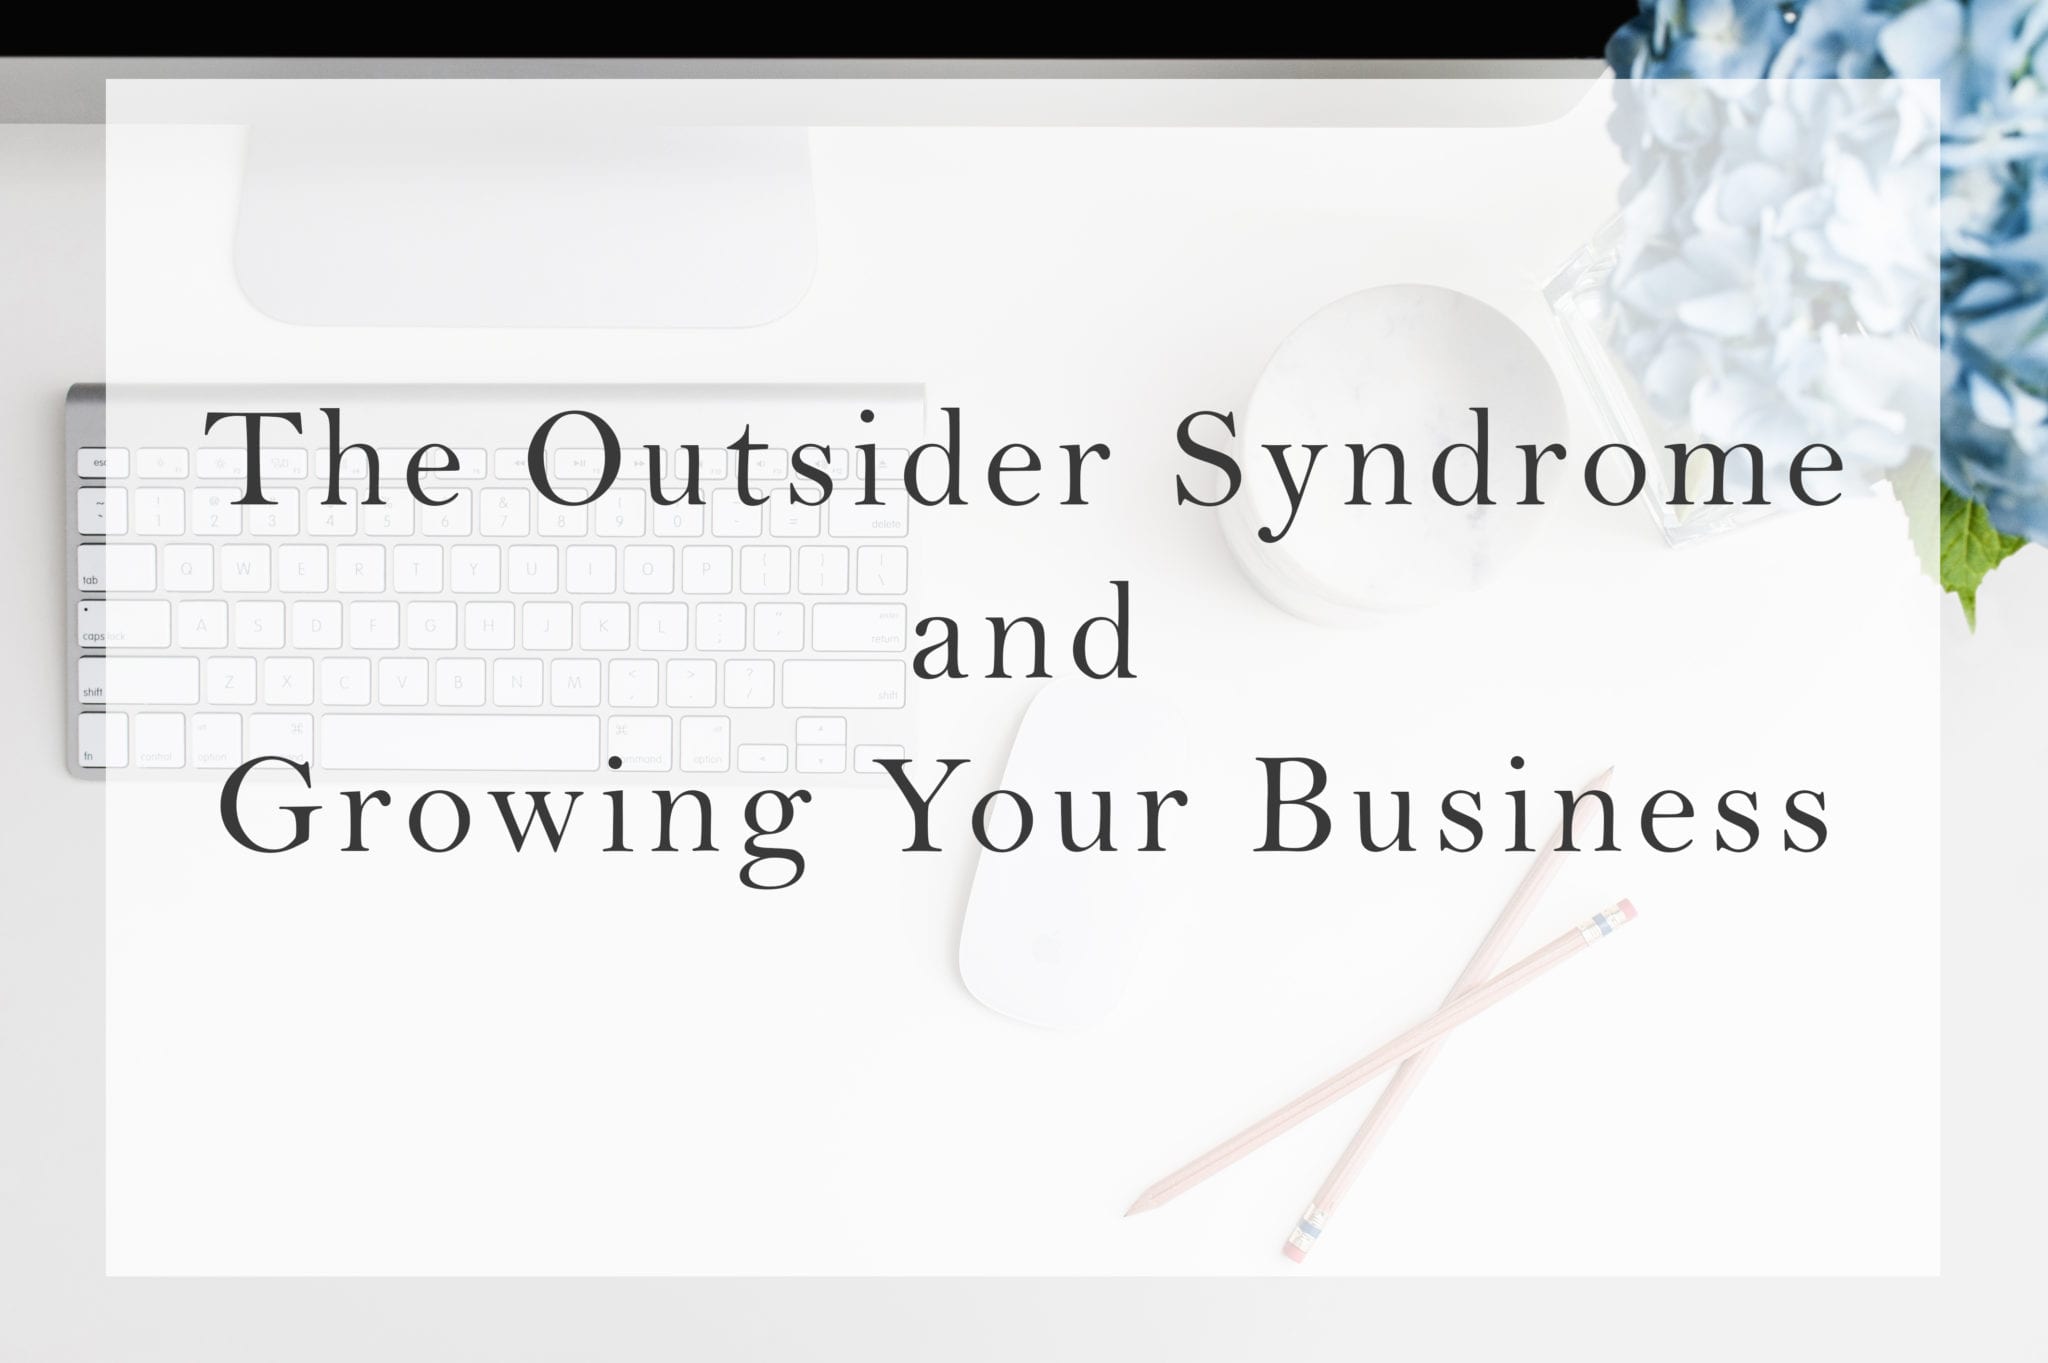 The Outsider Syndrome